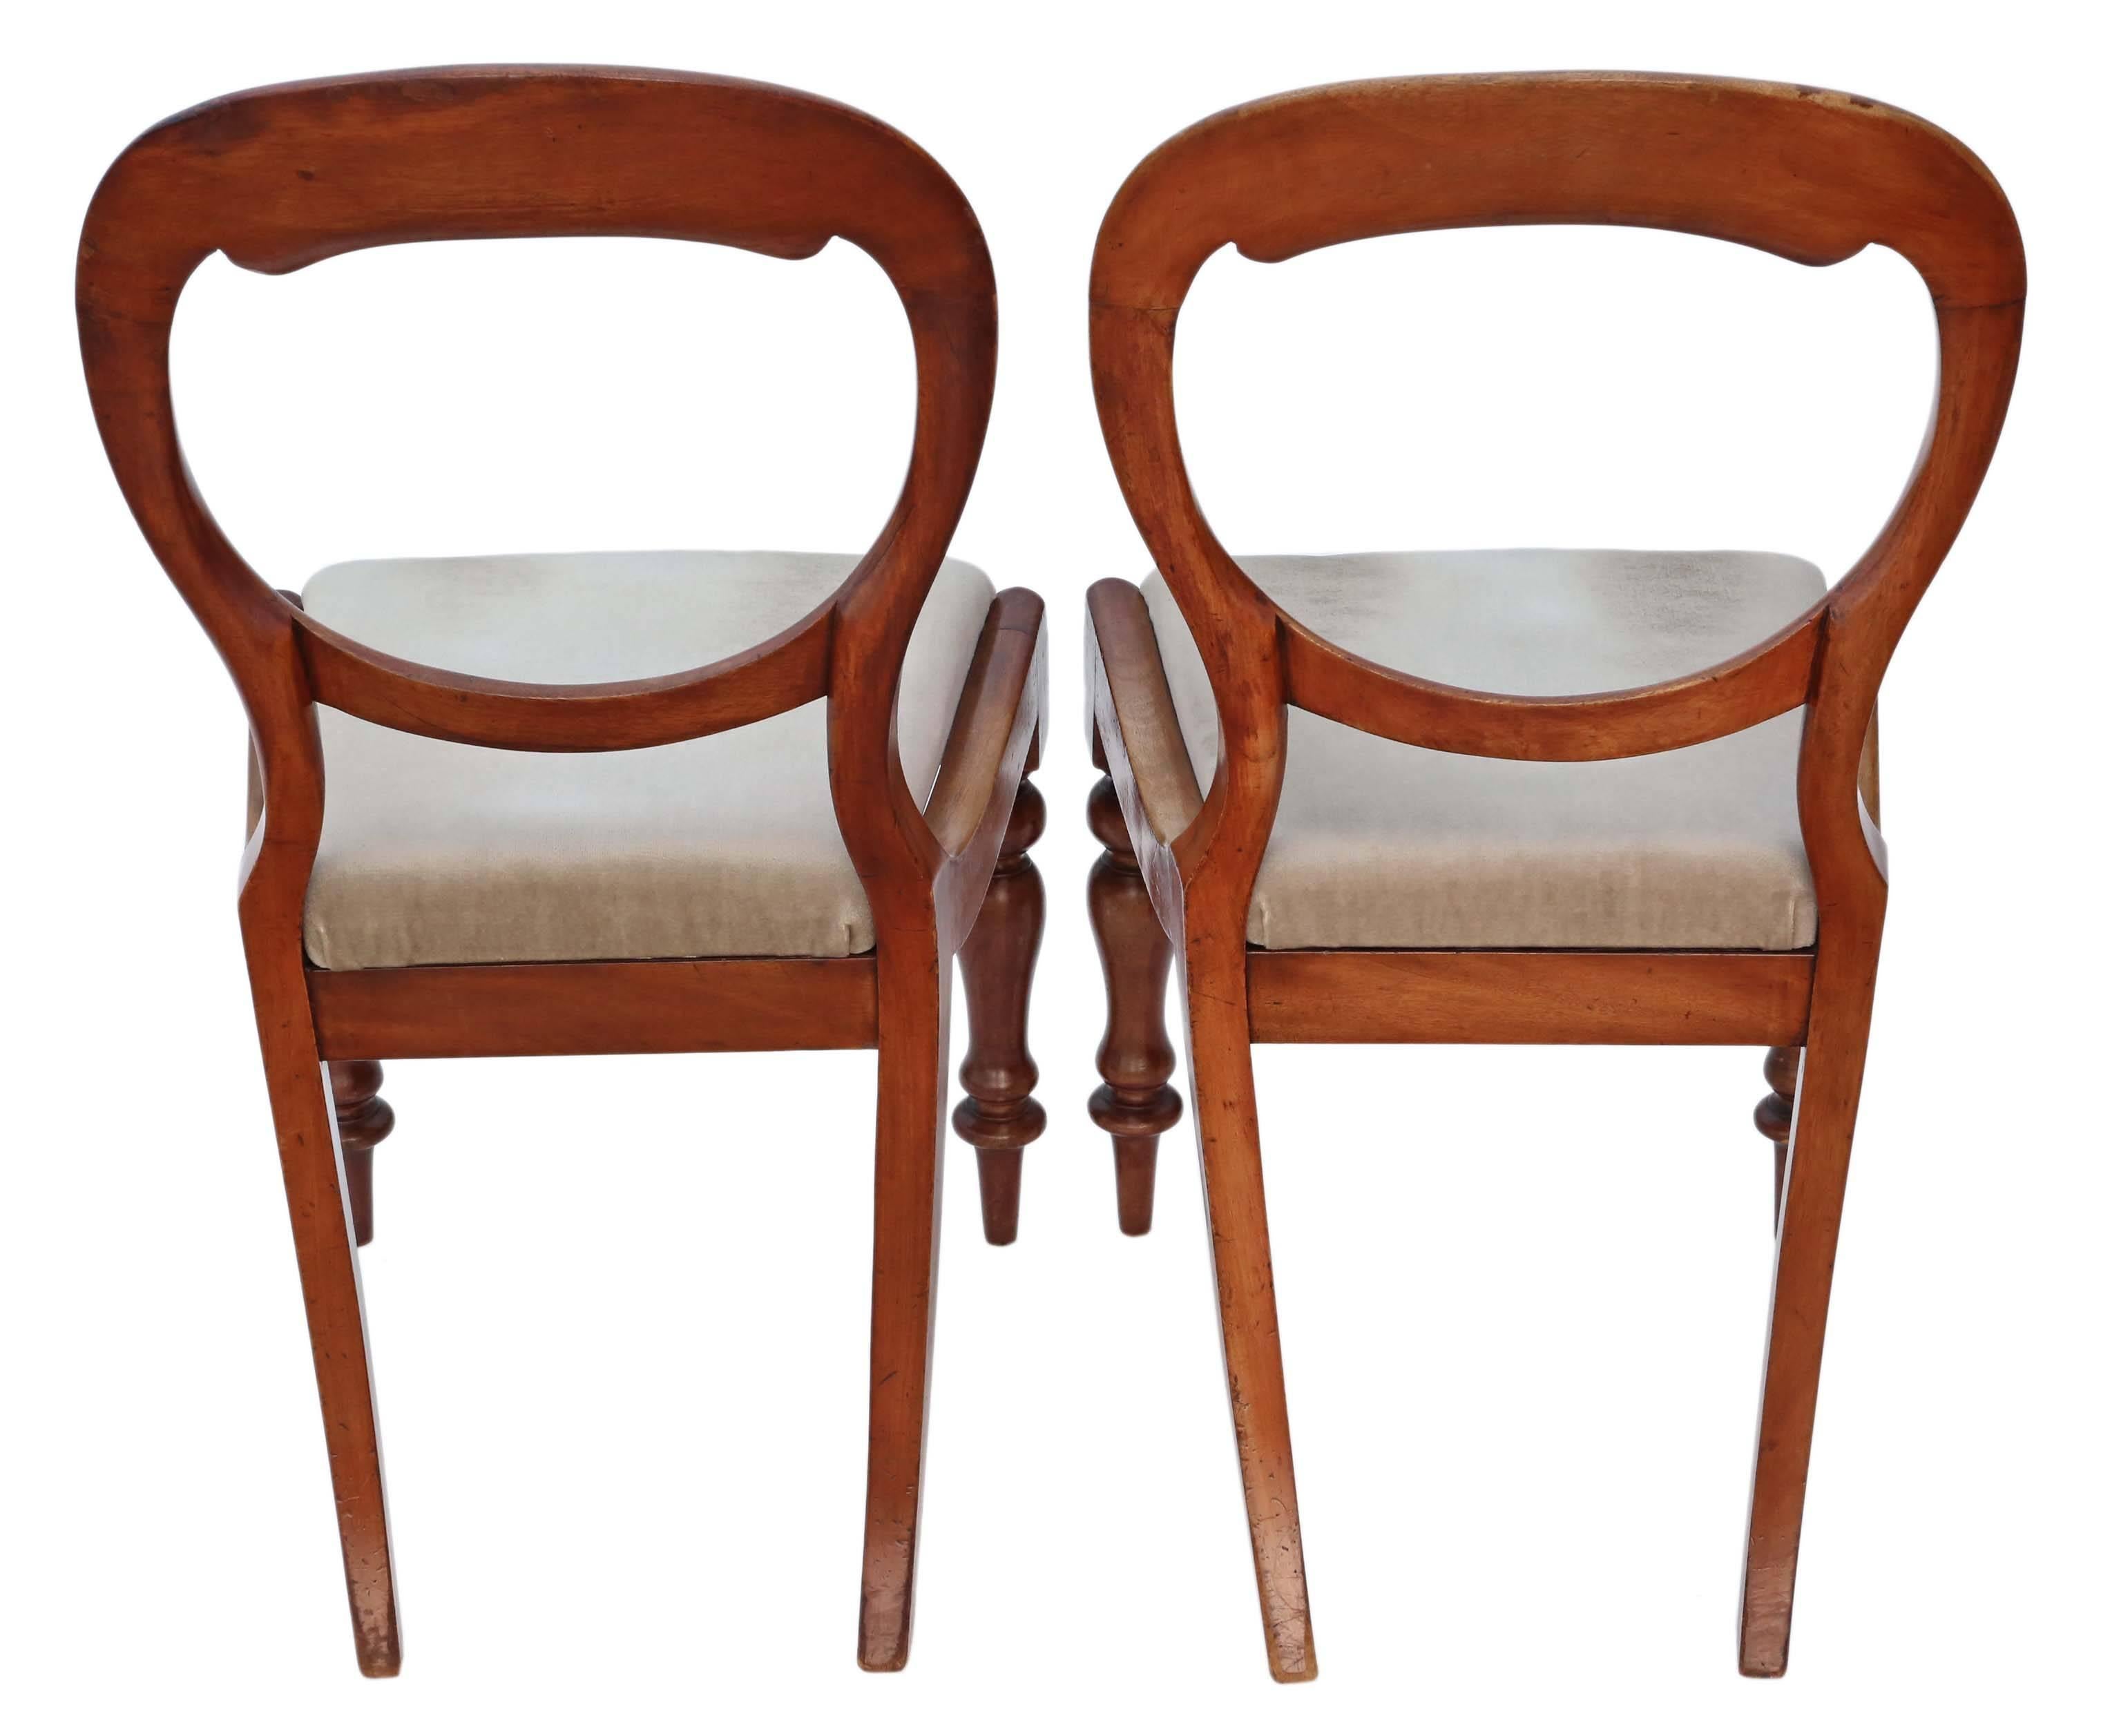 British Antique Quality Pair of Victorian circa 1880 Mahogany Balloon Back Dining Chairs For Sale